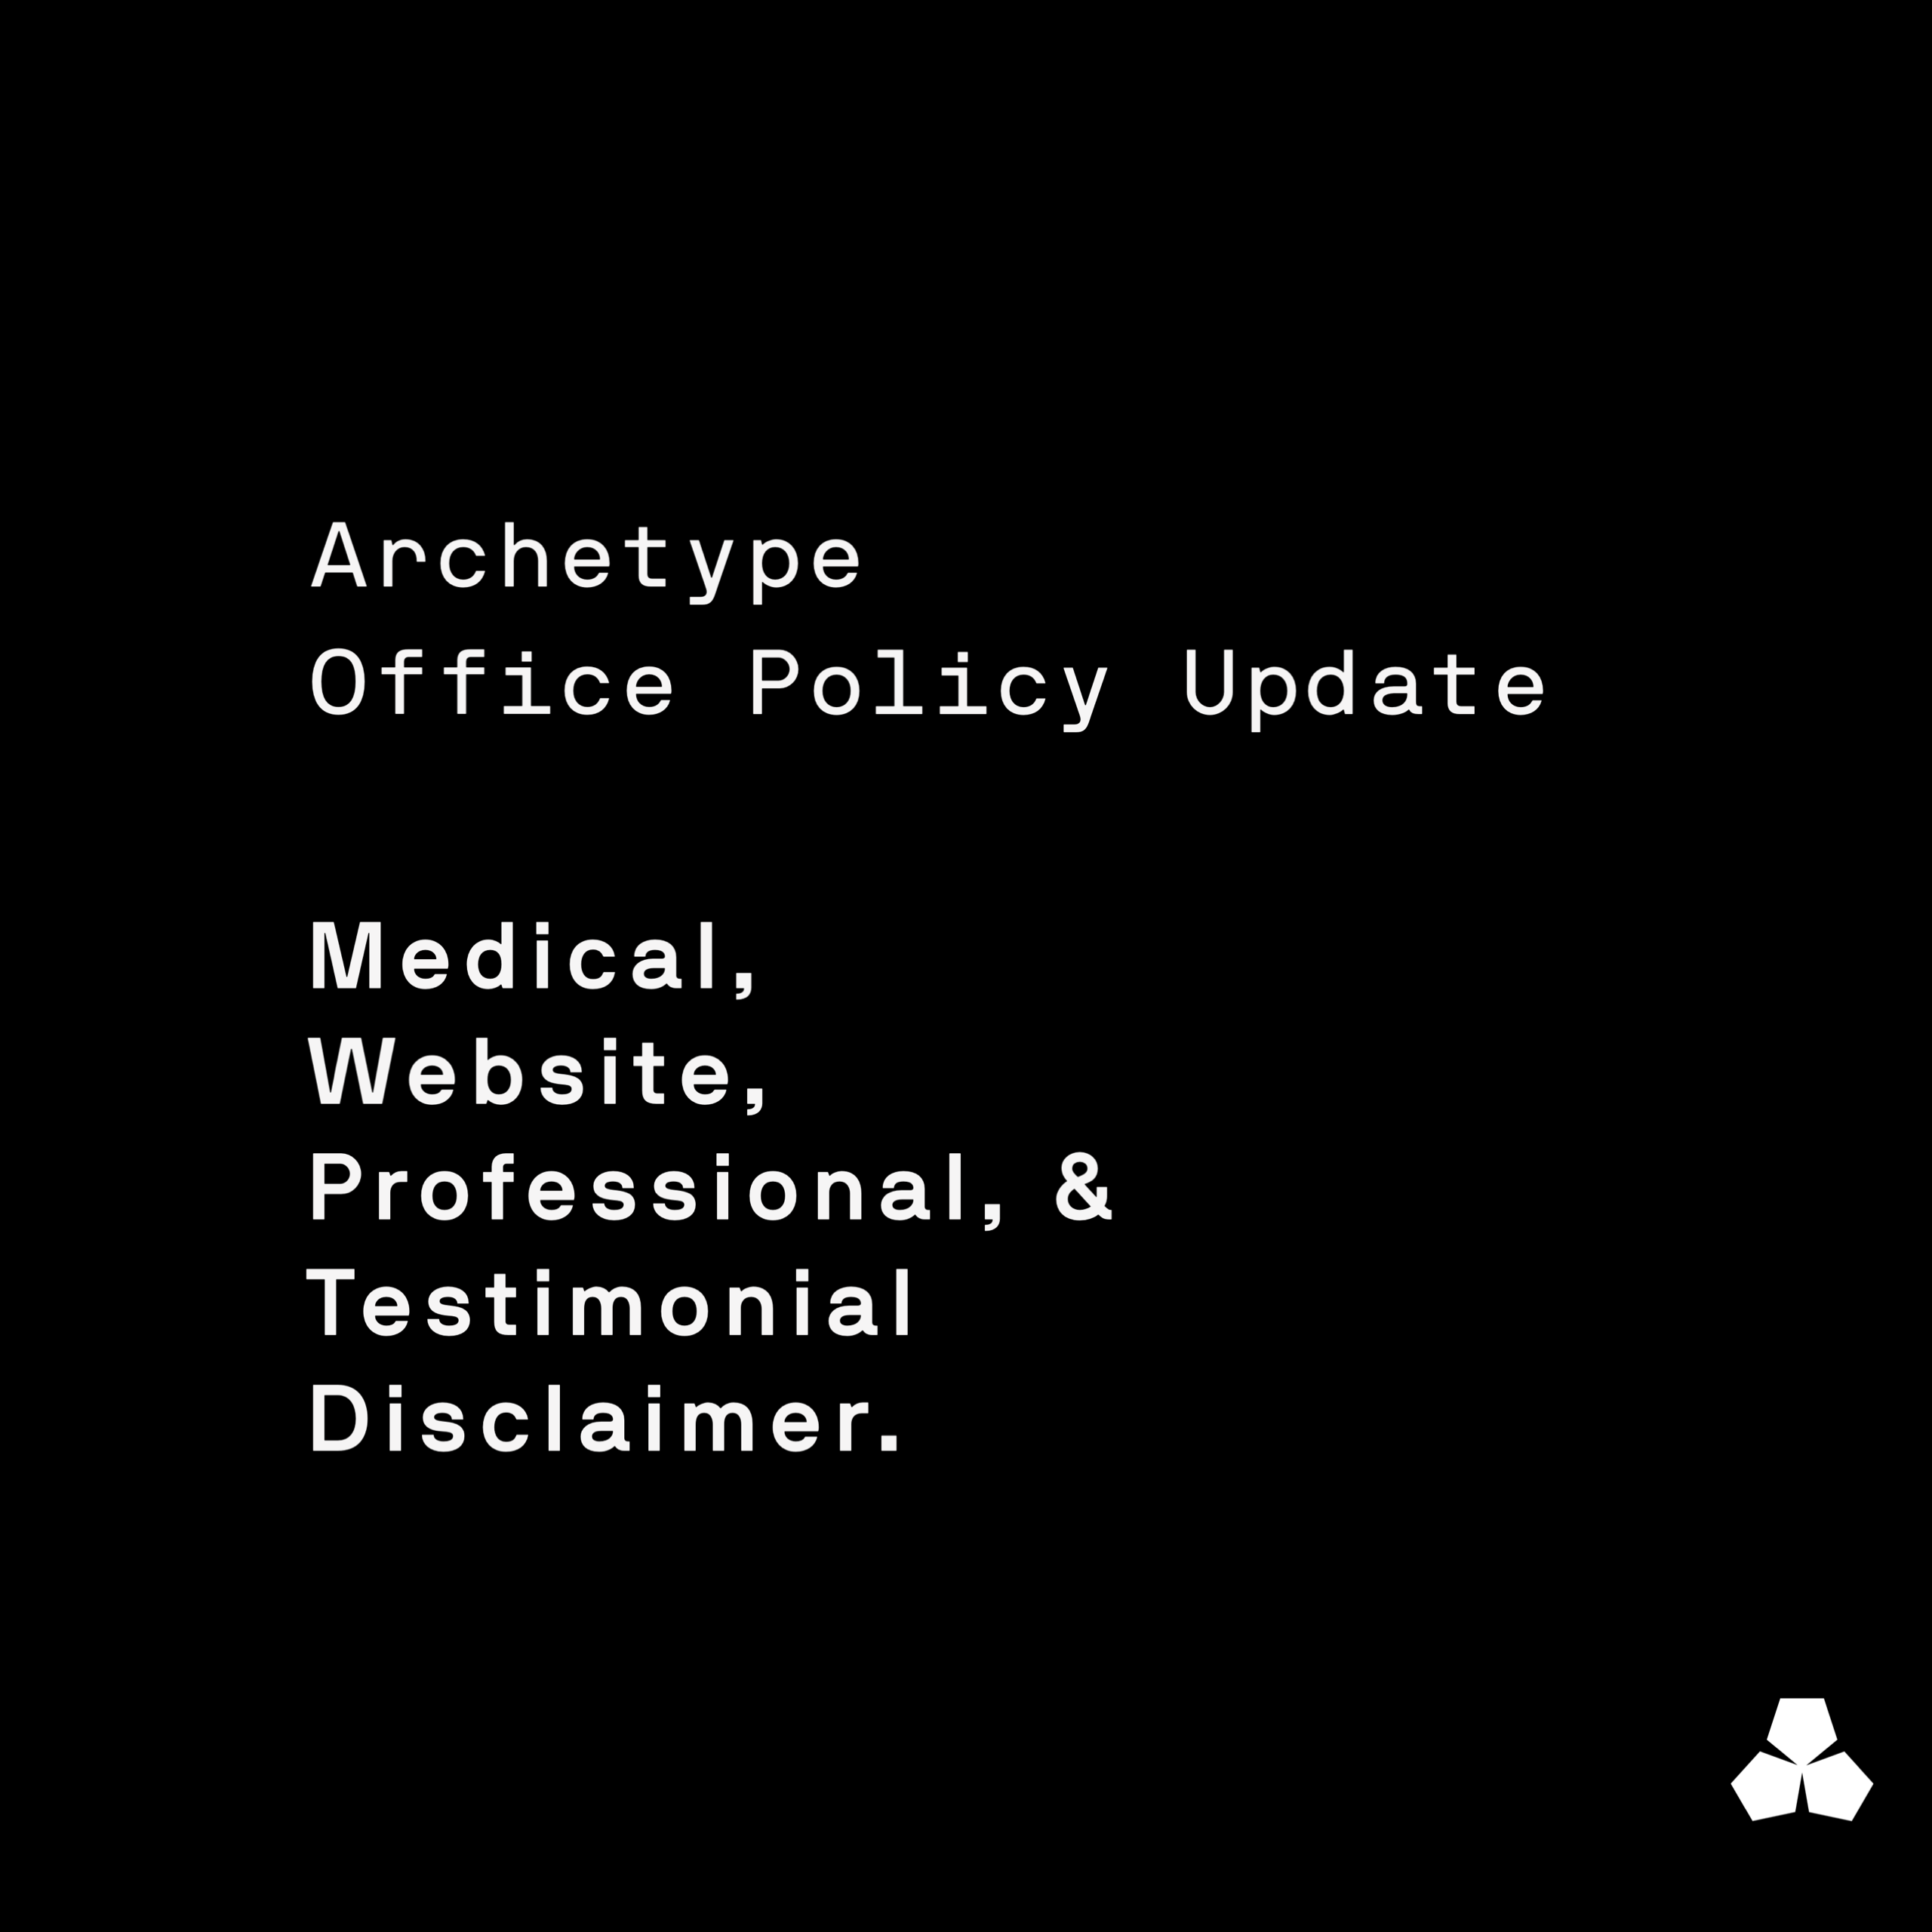 Archetype Disclaimer Update: Website, Professional, Testimonial Disclaimer